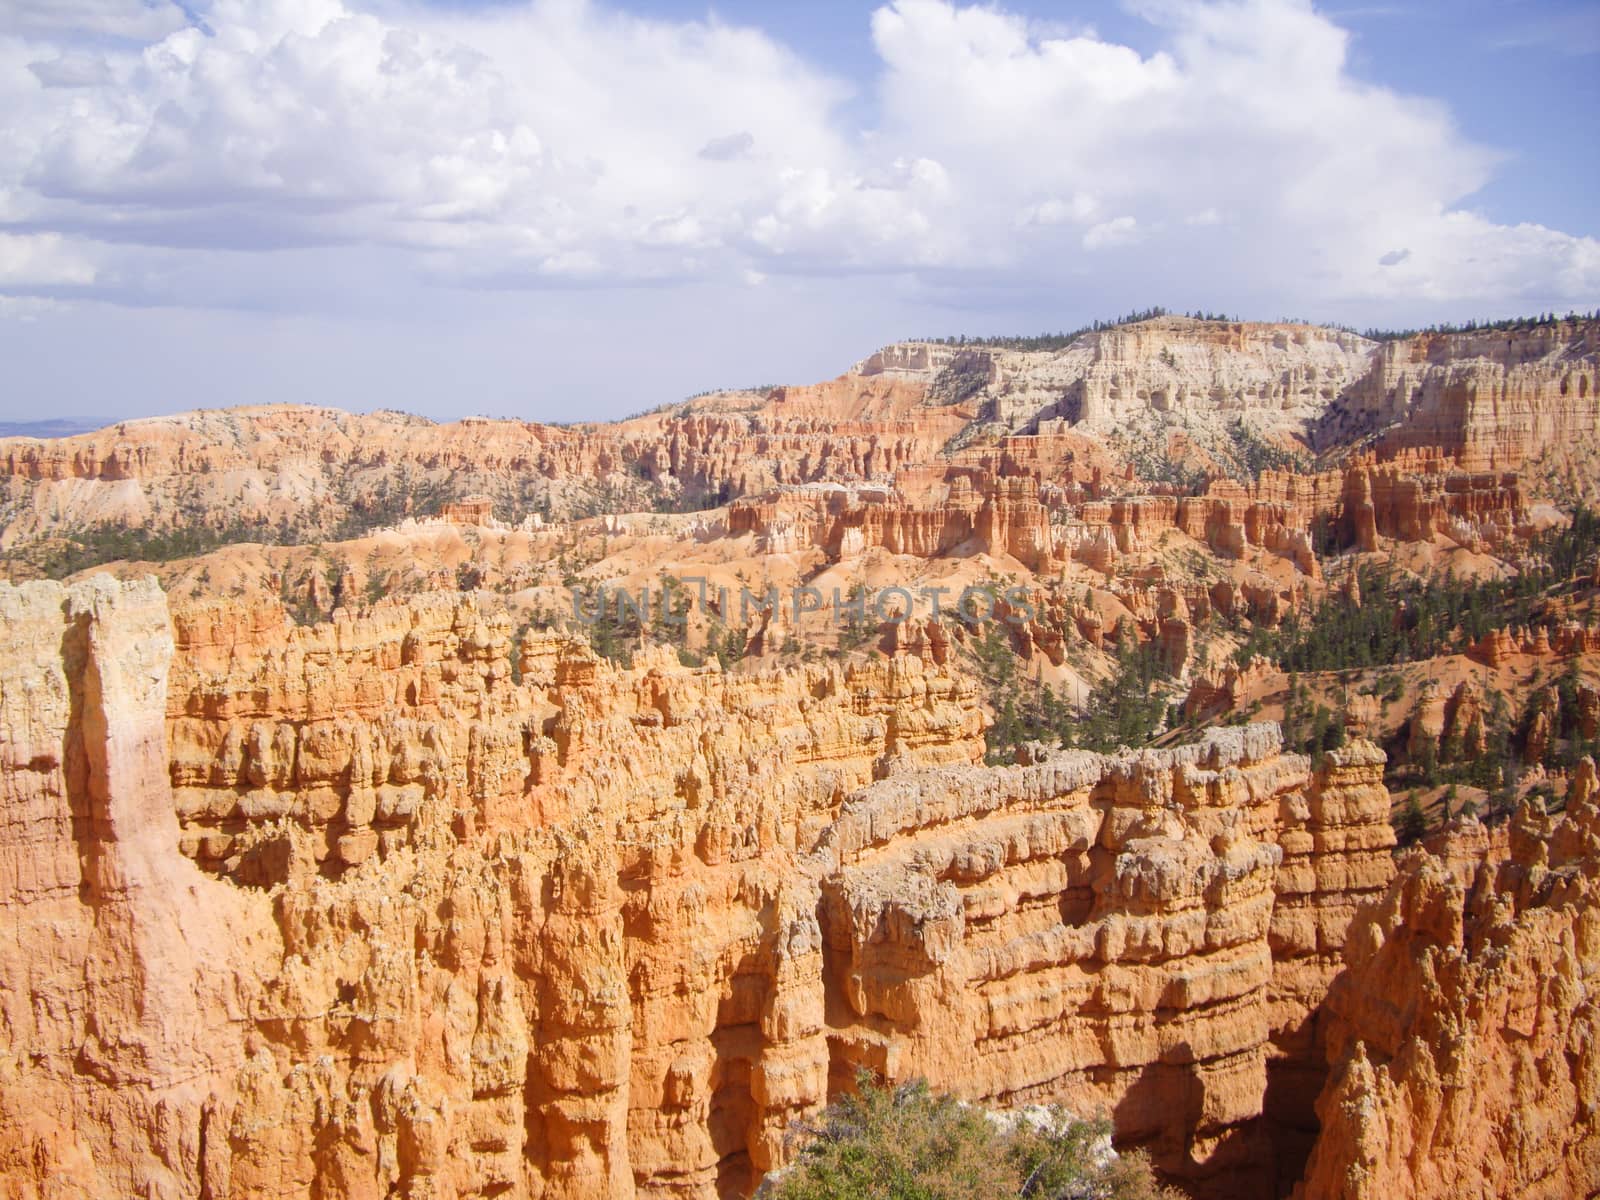 Summer Thunder clouds over Bryce Canyon by emattil